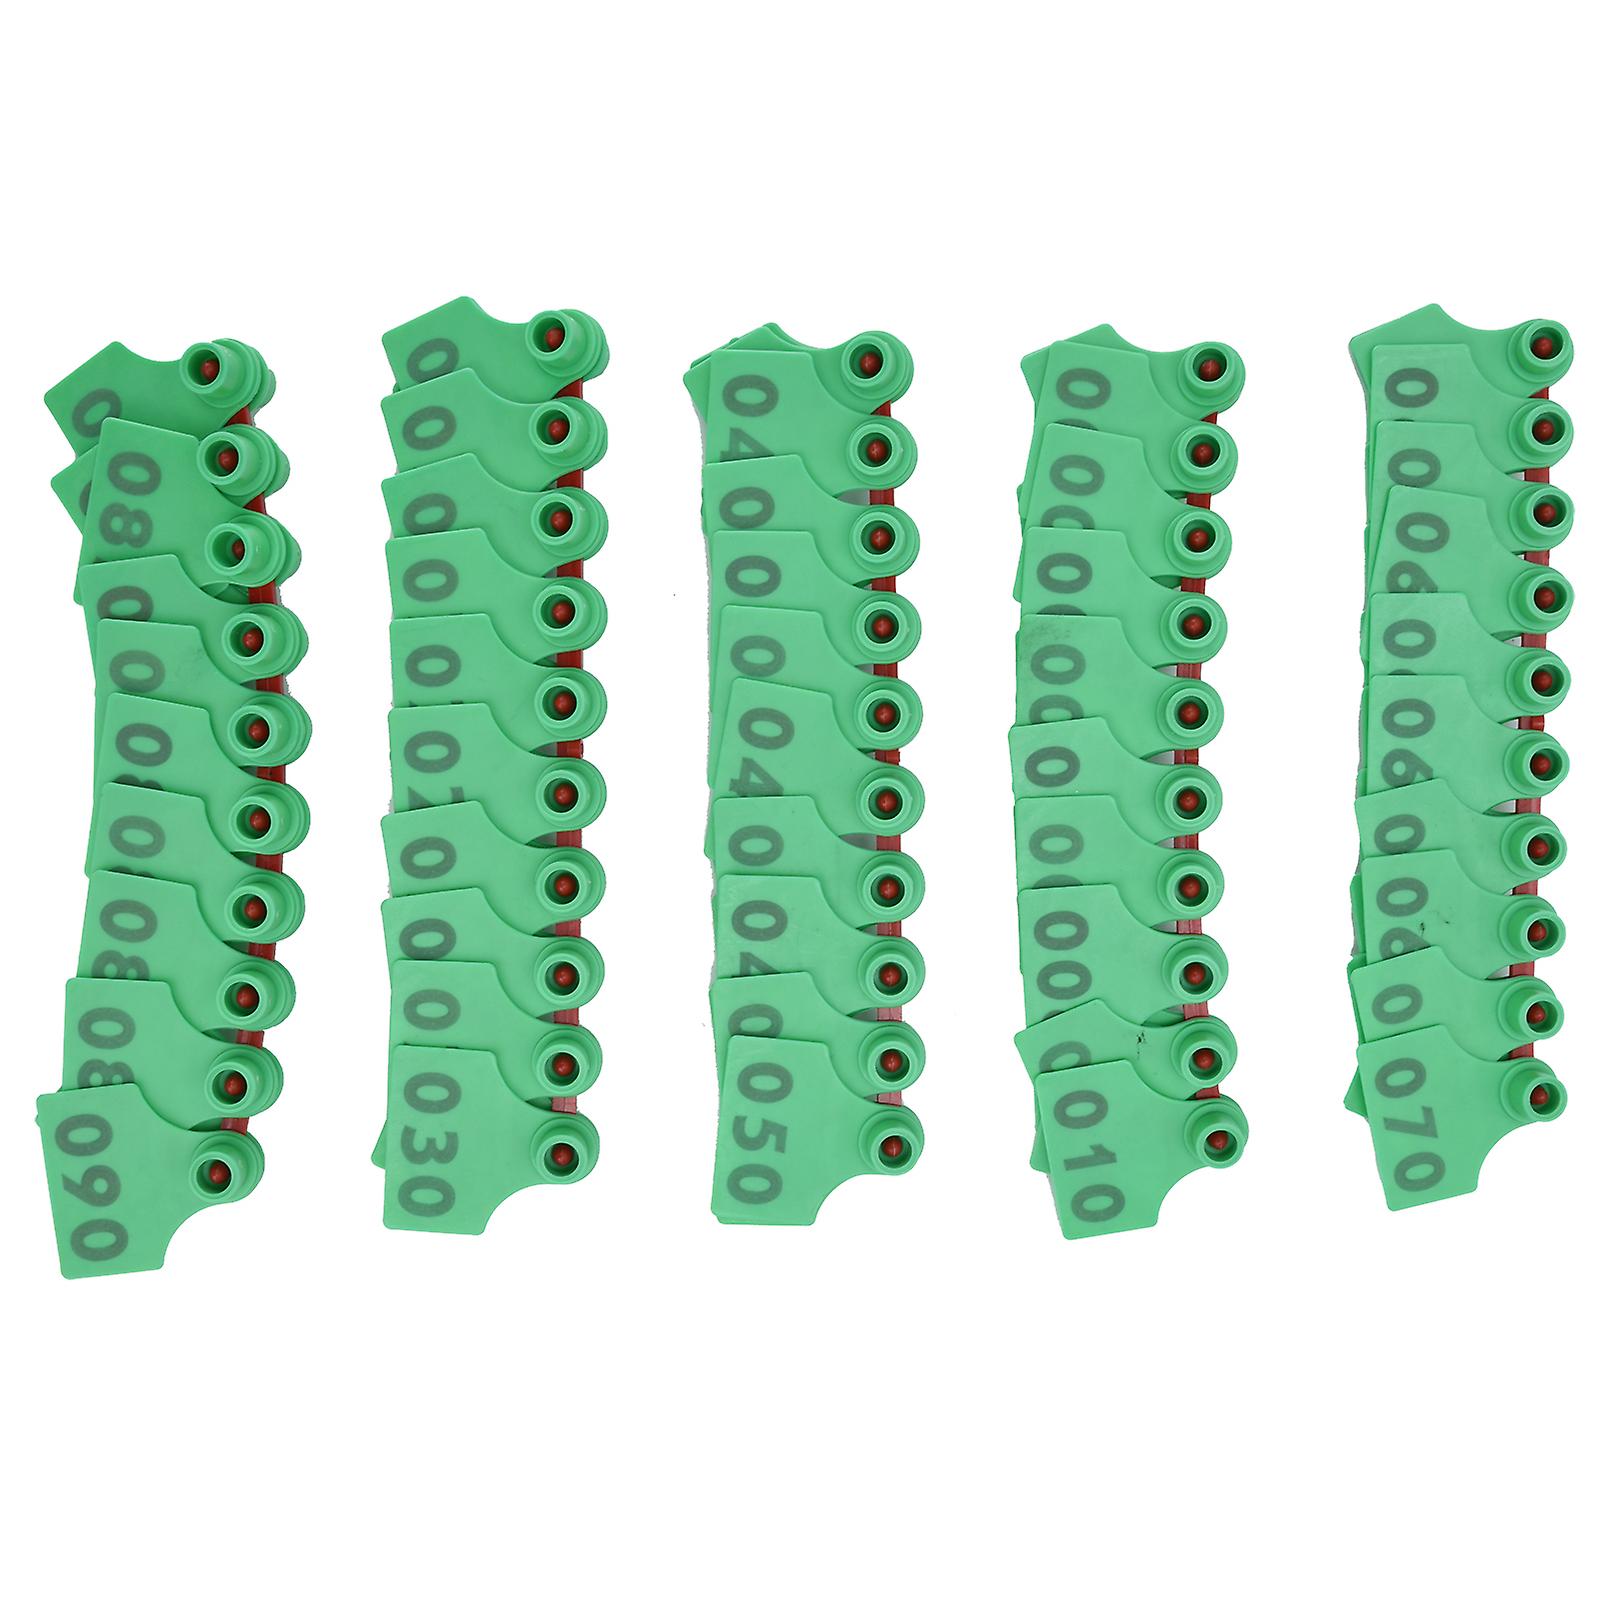 100pcs Tpu Pig Cow Ear Tag With Number 001100 Ear Label Tag Farm Livestock Accessorygreen